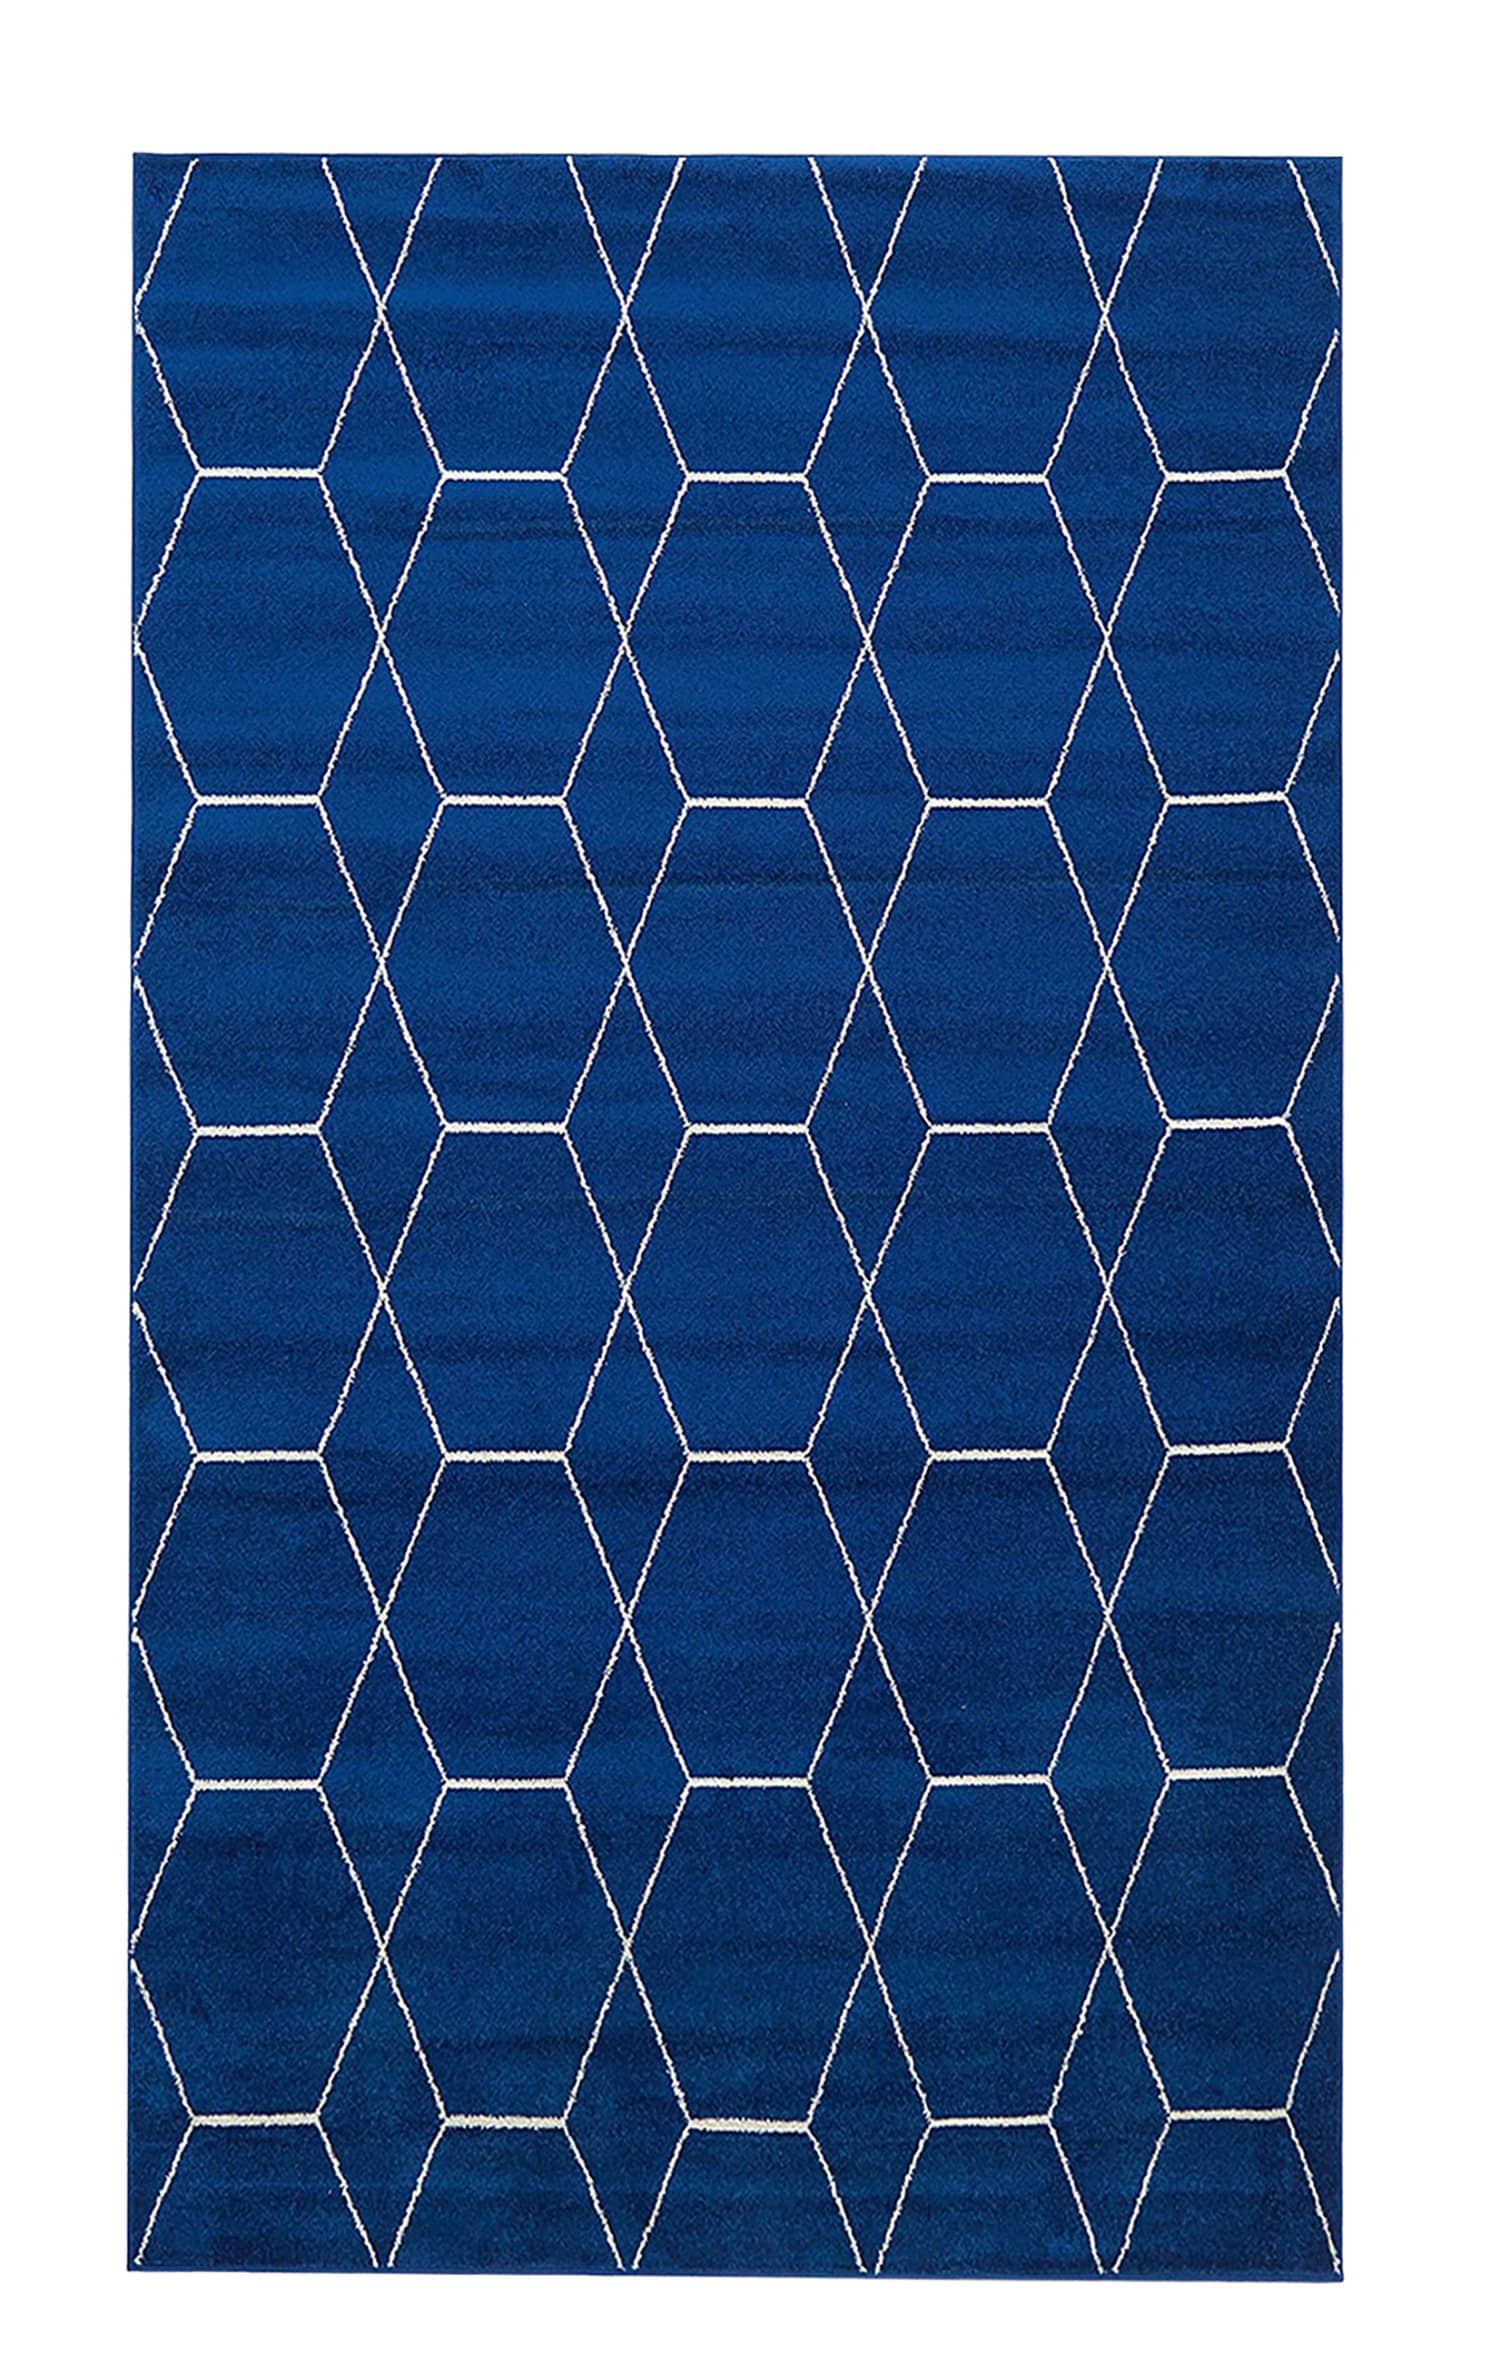 170 Navy blue moroccan collection area rug